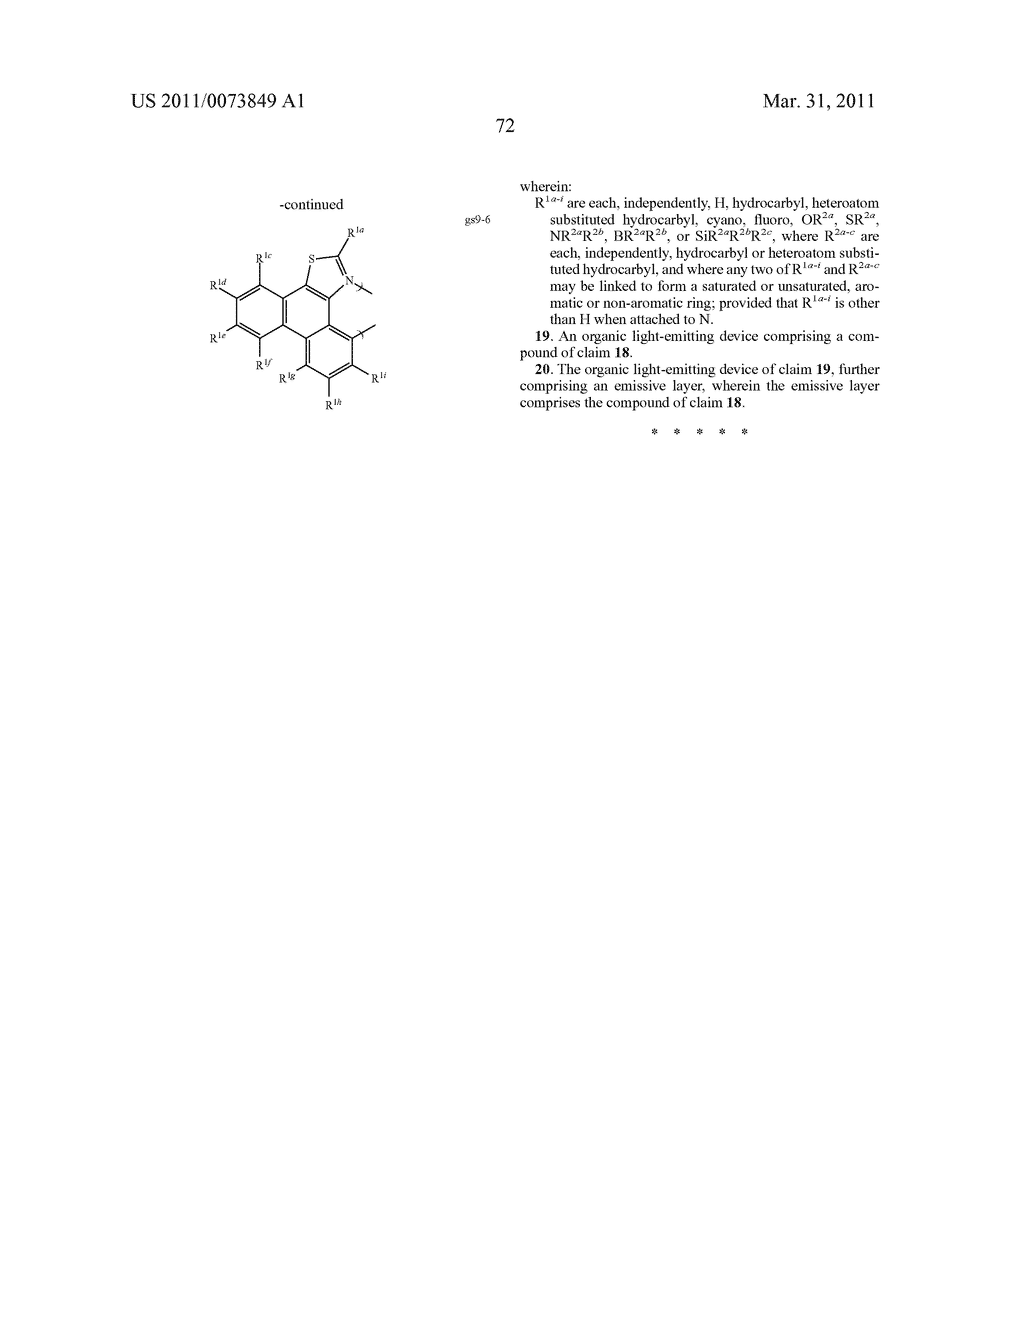 METAL COMPLEXES OF CYCLOMETALLATED IMIDAZO[1,2-f ]PHENANTHRIDINE AND DIIMIDAZO[1,2-a:1',2'-c ]QUNIAZOLINE LIGANDS AND ISOELECTRONIC AND BENZANNULATED ANALOGS THEREOF - diagram, schematic, and image 88